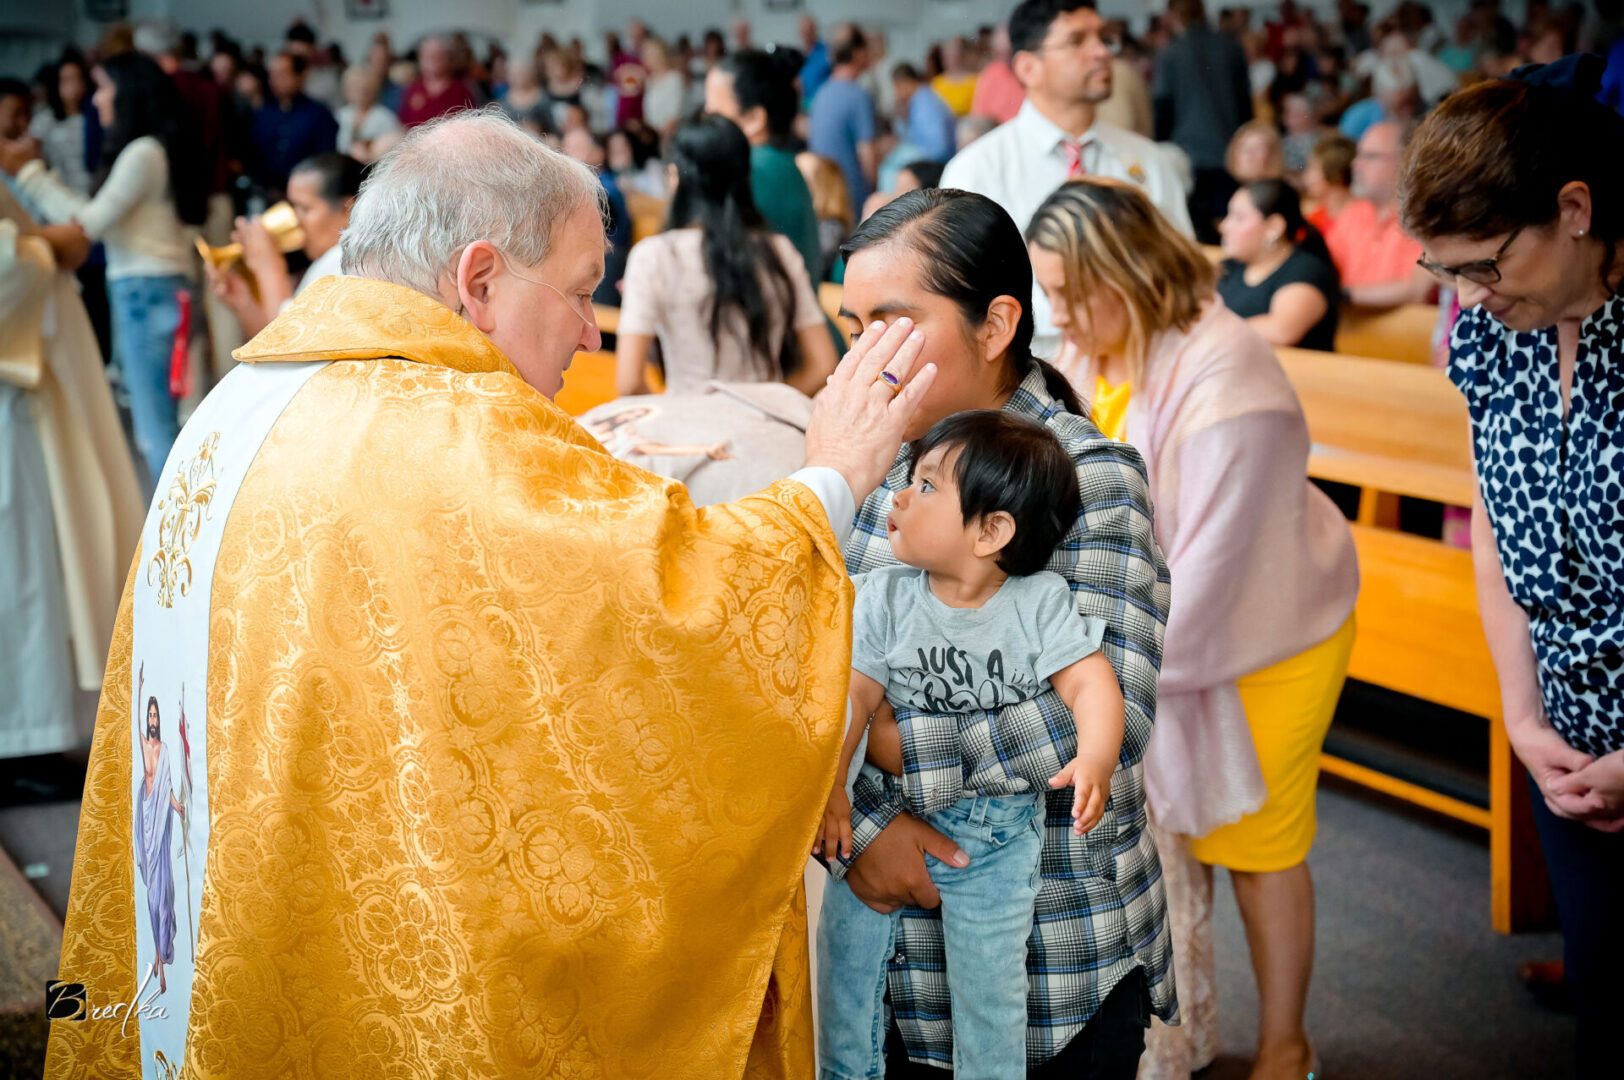 Priest blessing a child in a church.